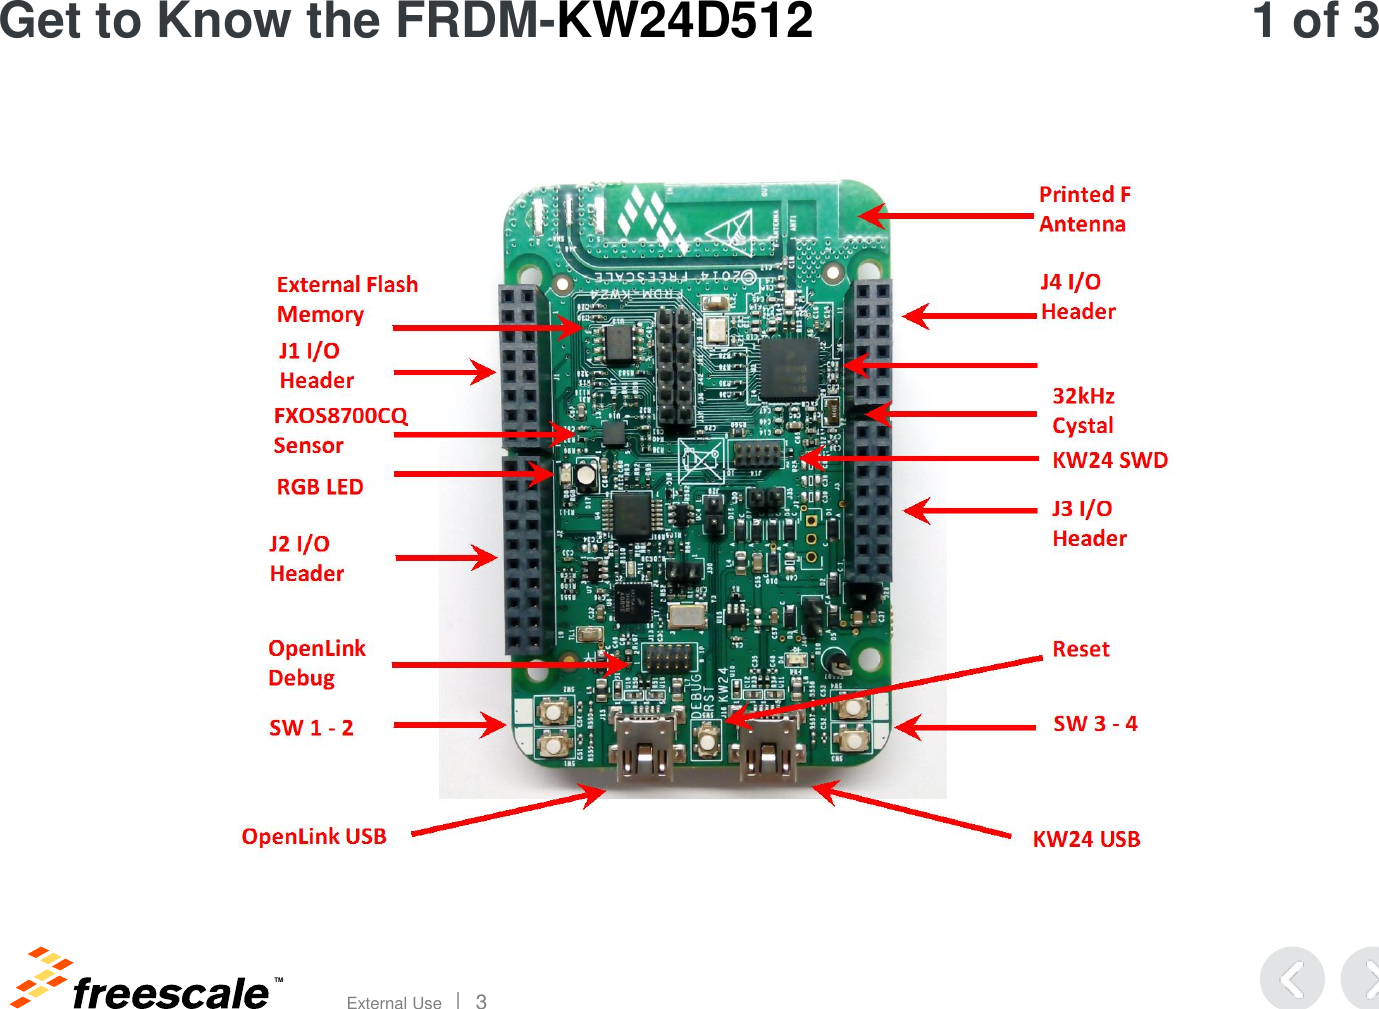 TM External Use       3 Get to Know the FRDM-KW24D512  1 of 3 